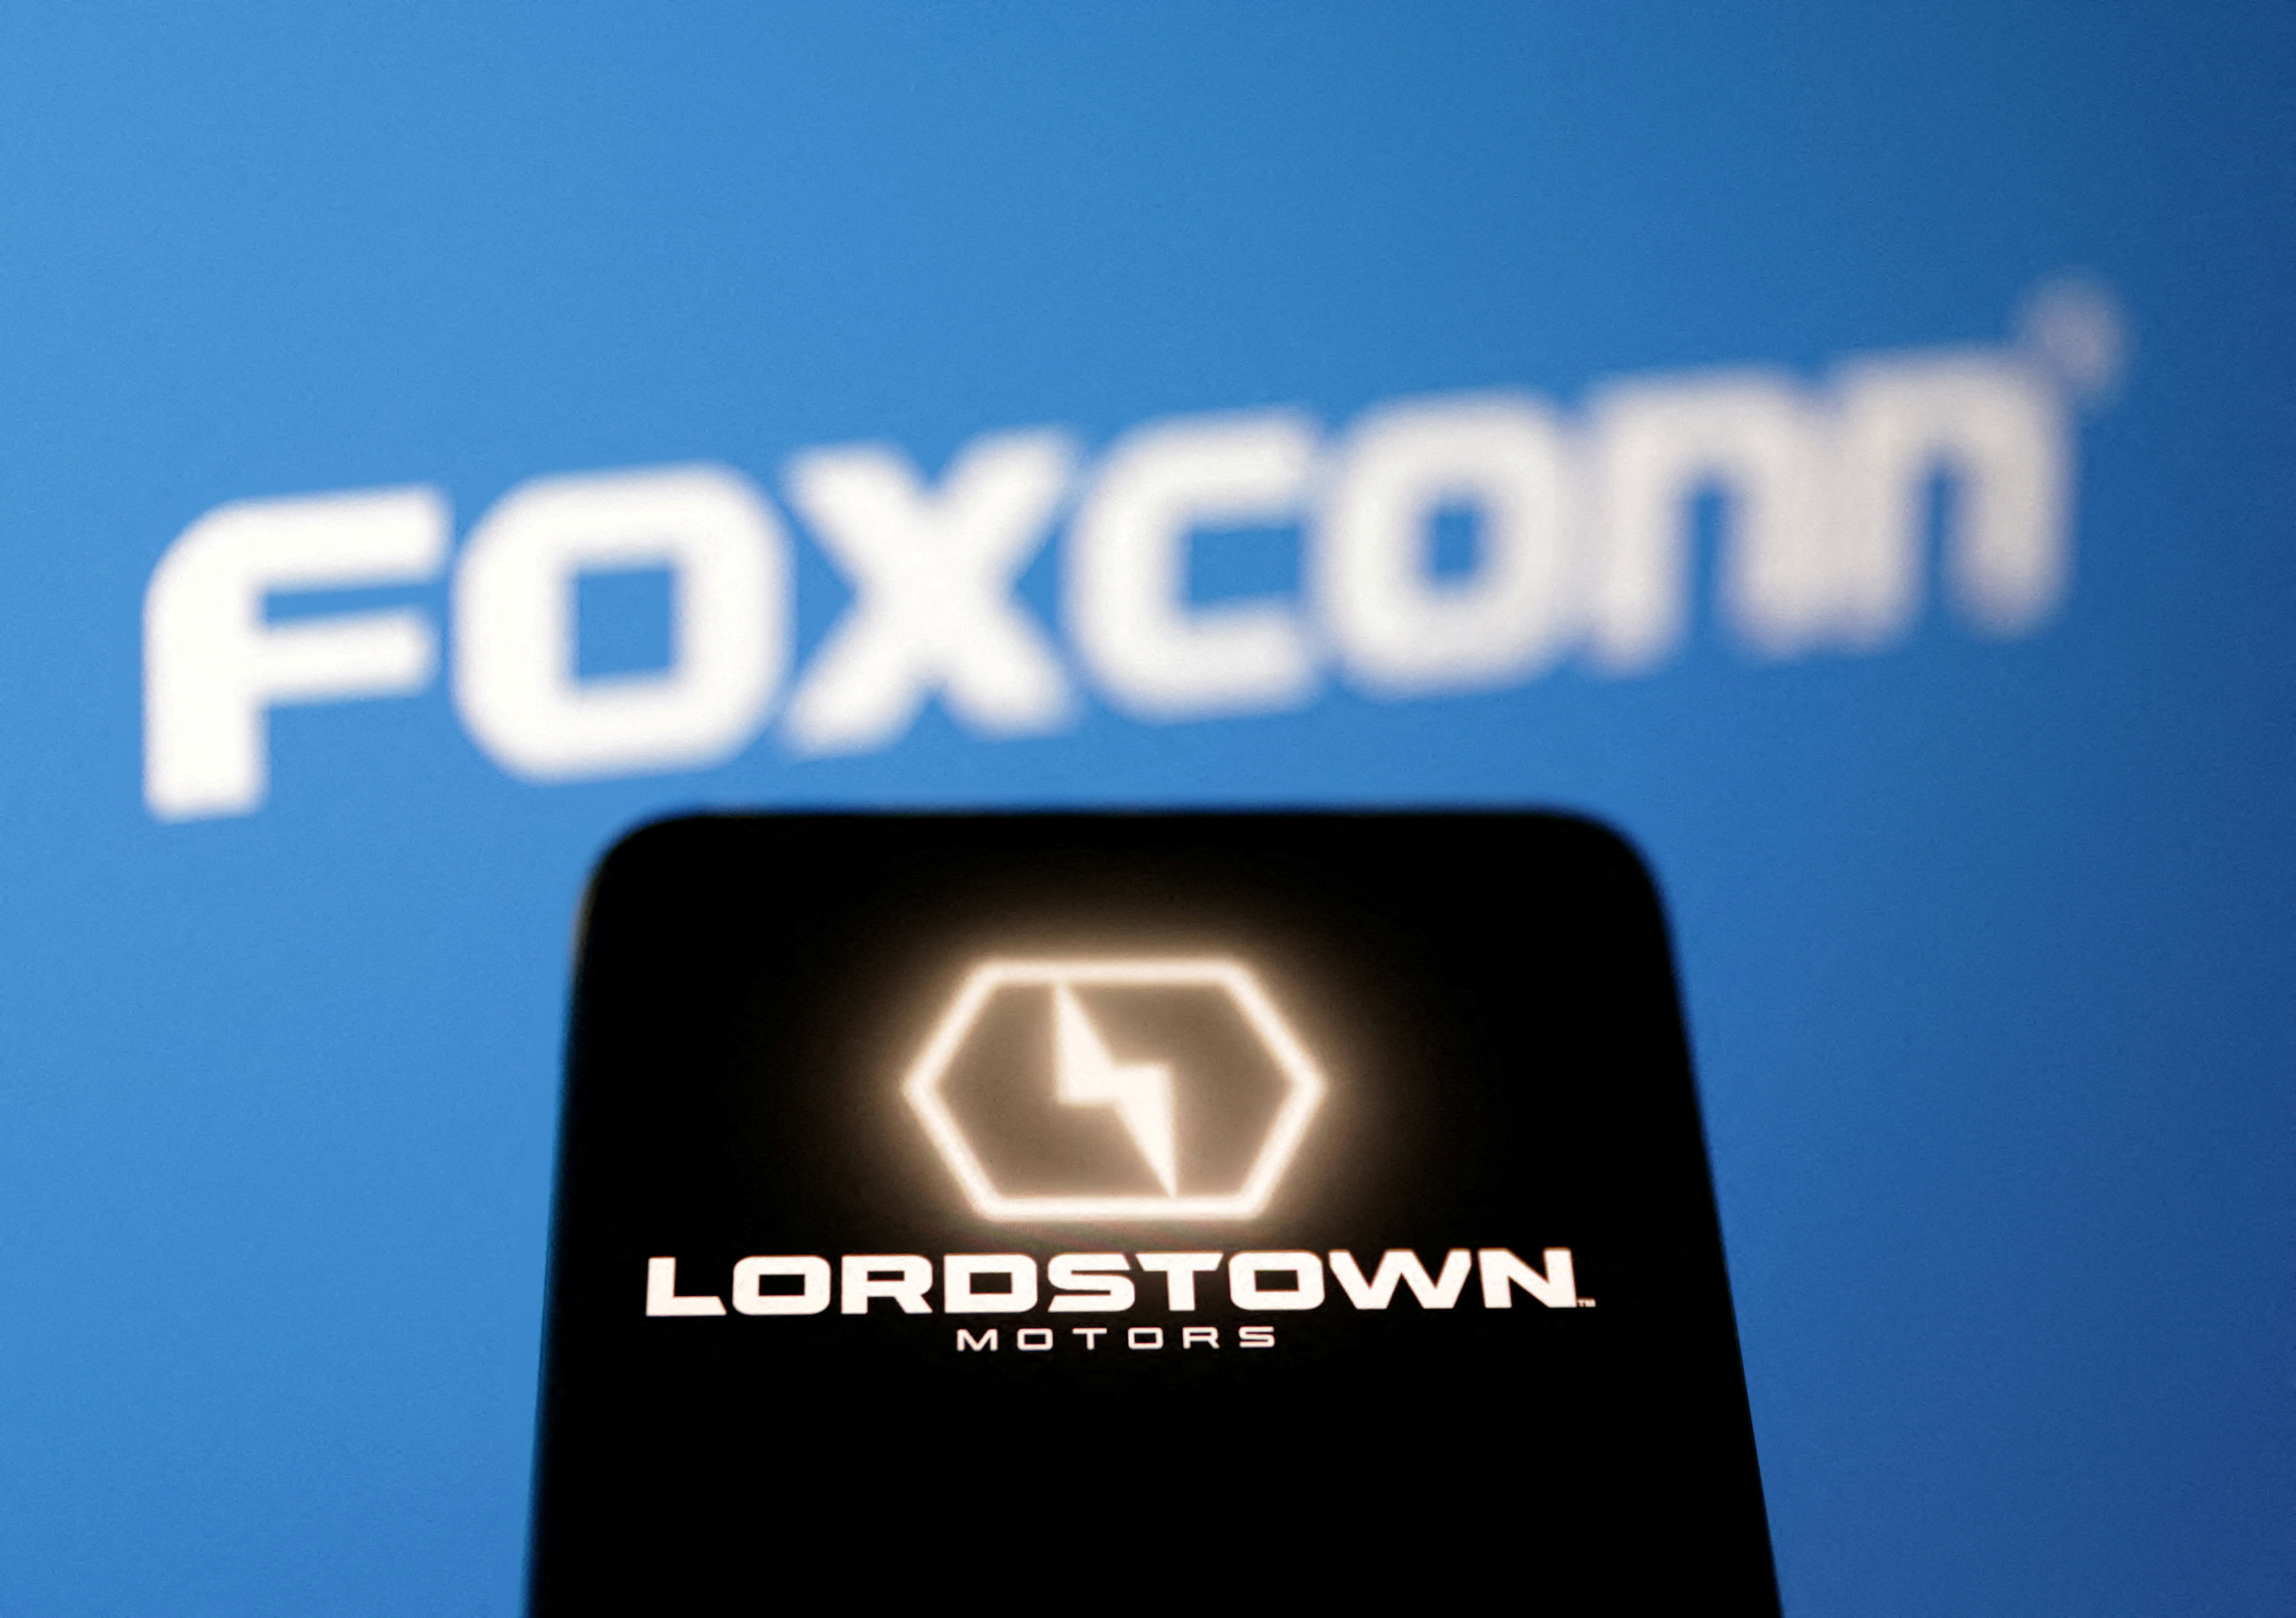 Illustration shows Lordstown Motors and Foxconn logos